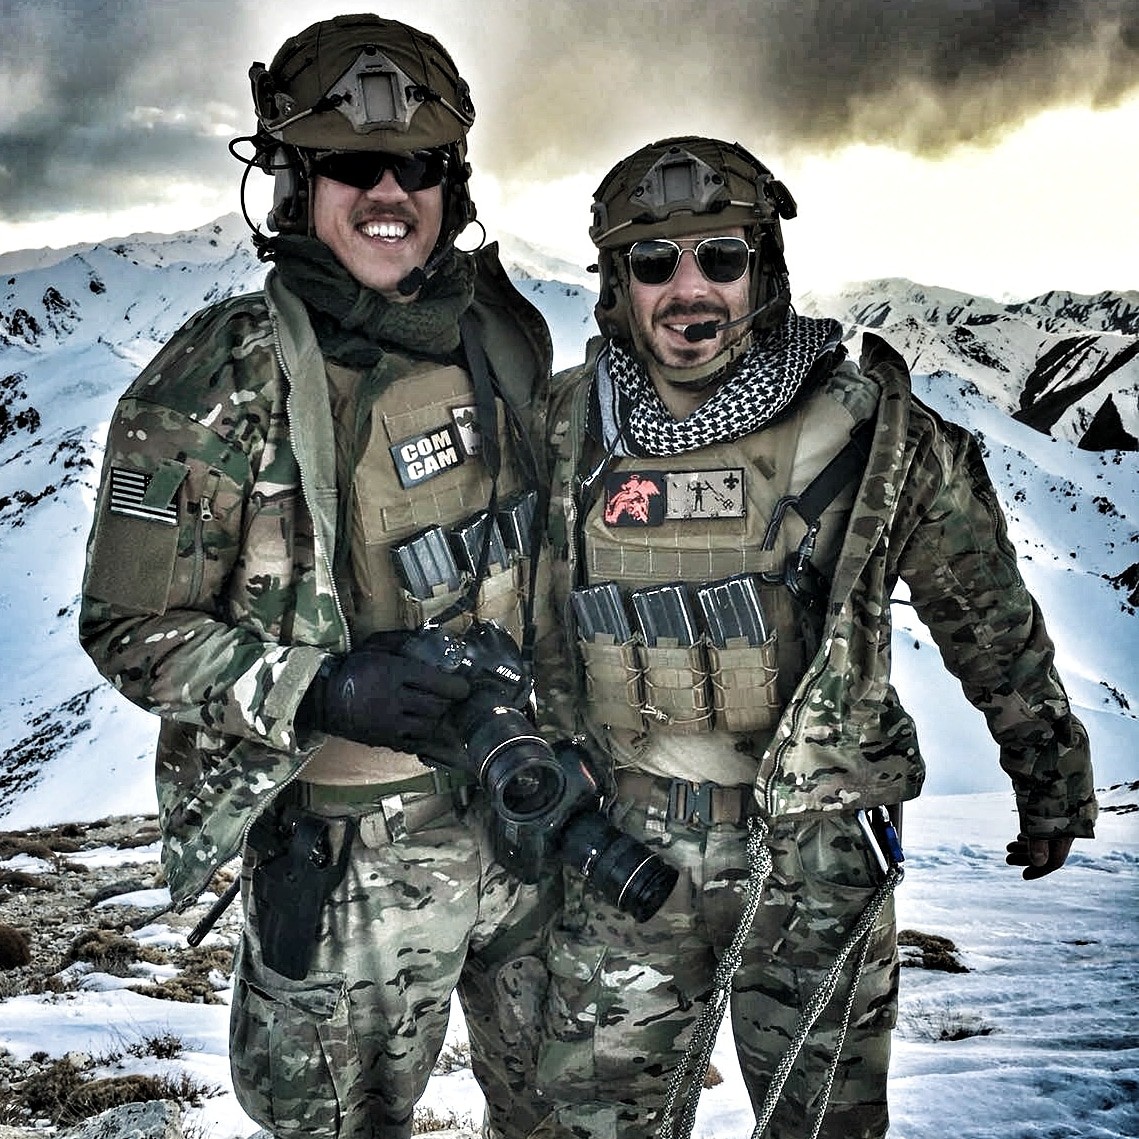 Gregory Brook, wearing military gear, poses for picture with fellow service member in front of a mountain range.